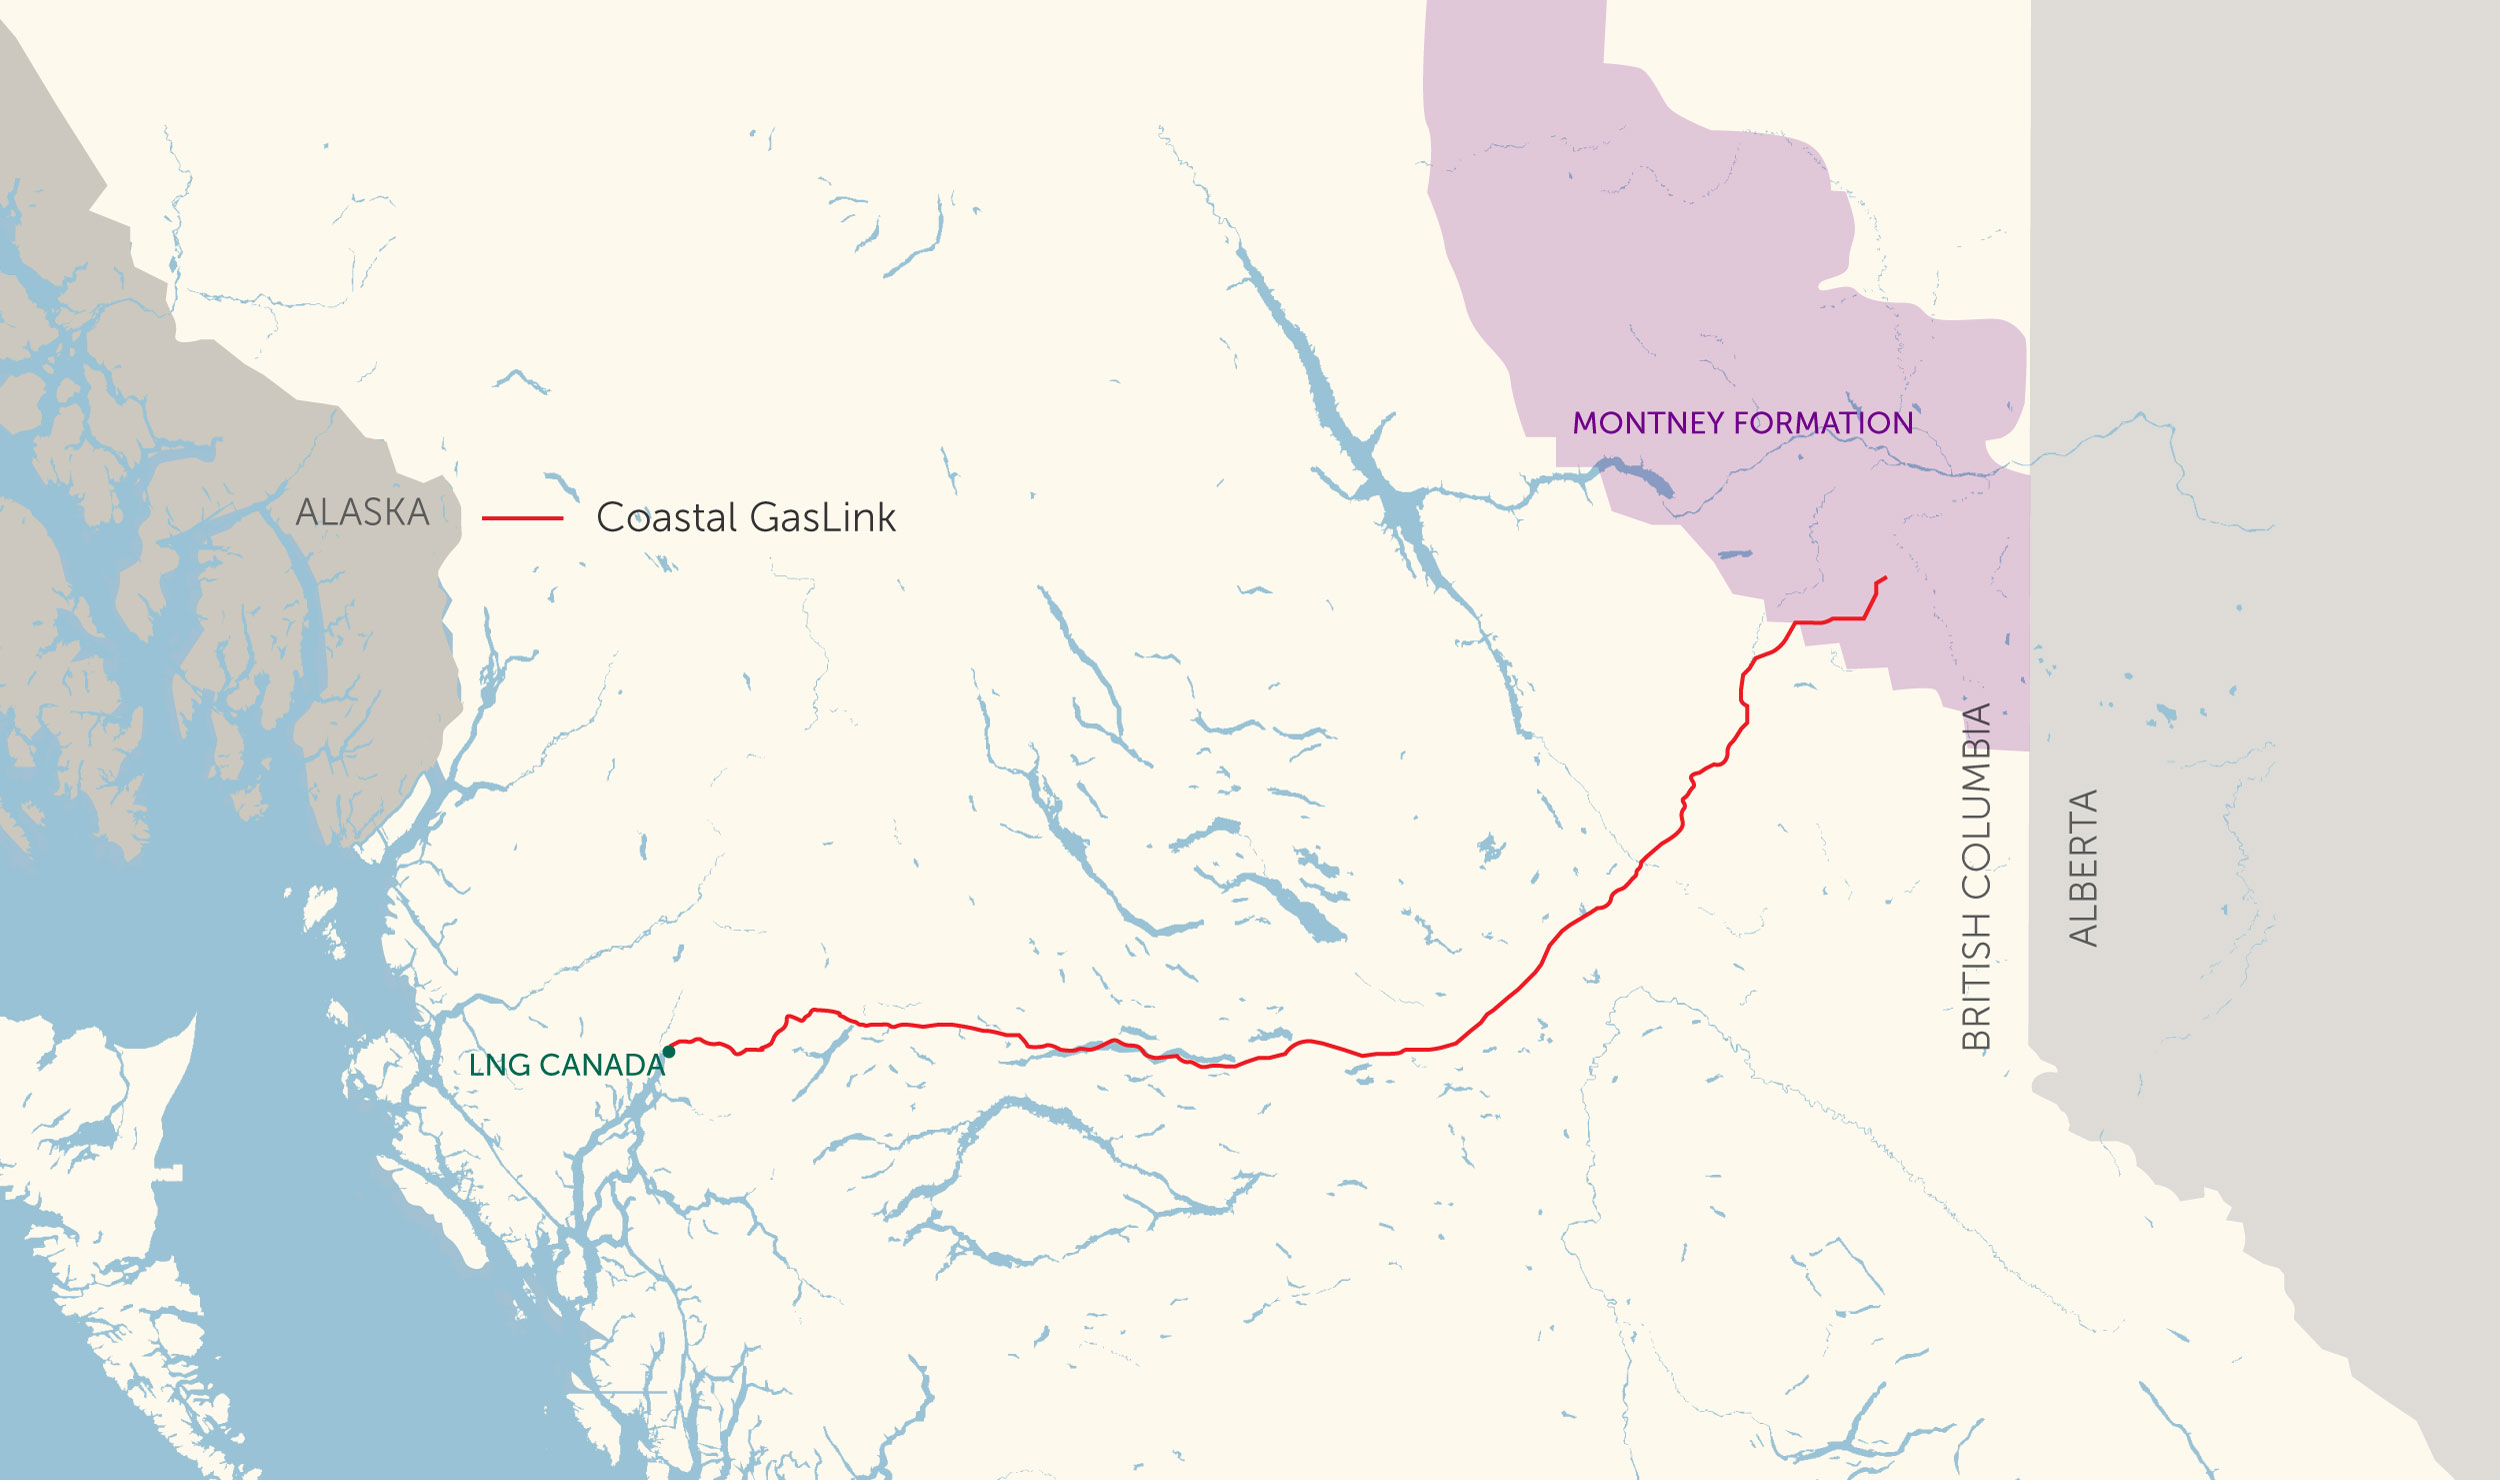 Map of TC Energy's Coastal GasLink pipeline route, and LNG Canada project marker.